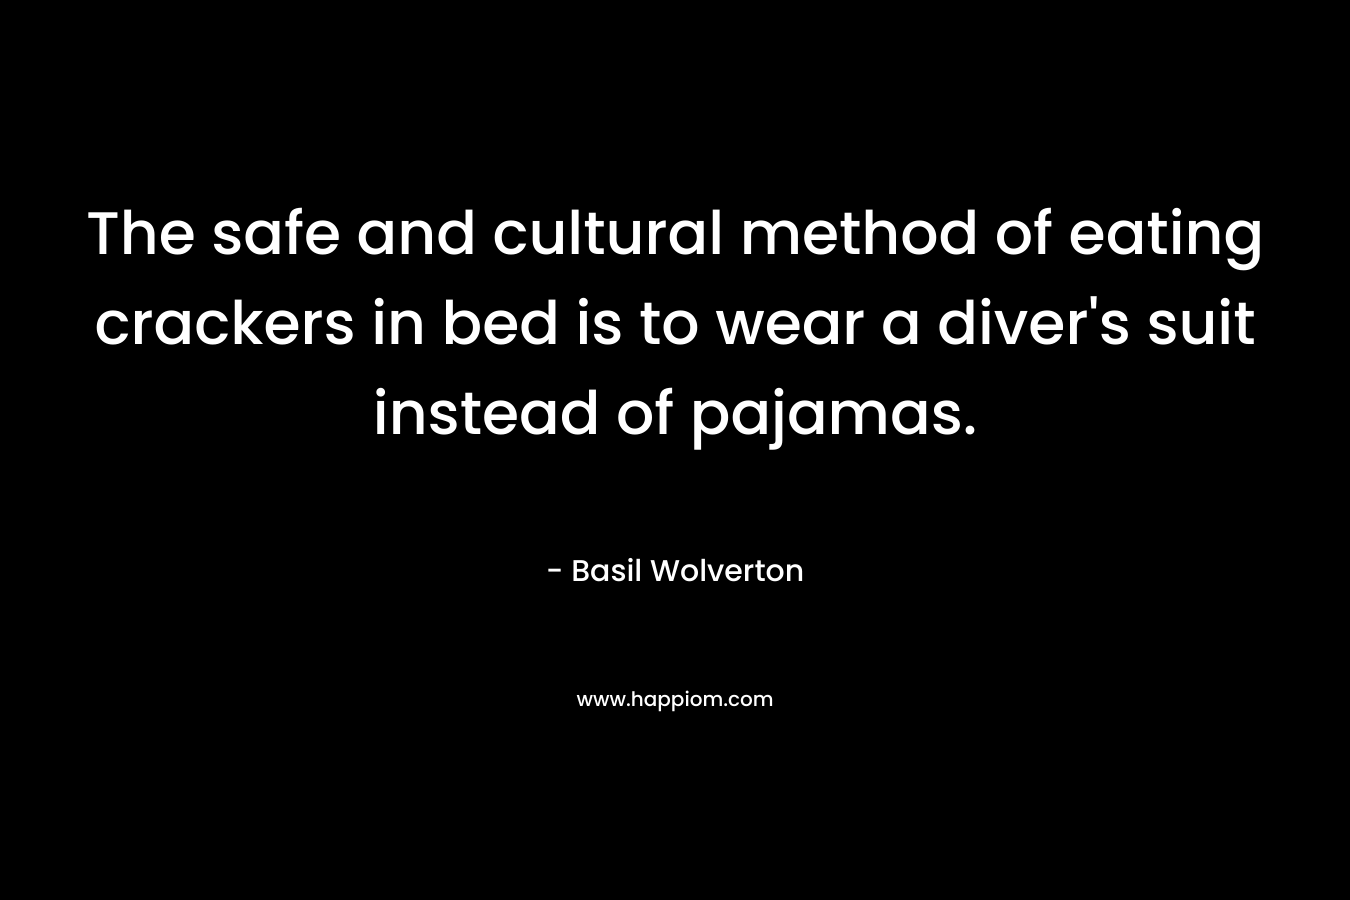 The safe and cultural method of eating crackers in bed is to wear a diver’s suit instead of pajamas. – Basil Wolverton